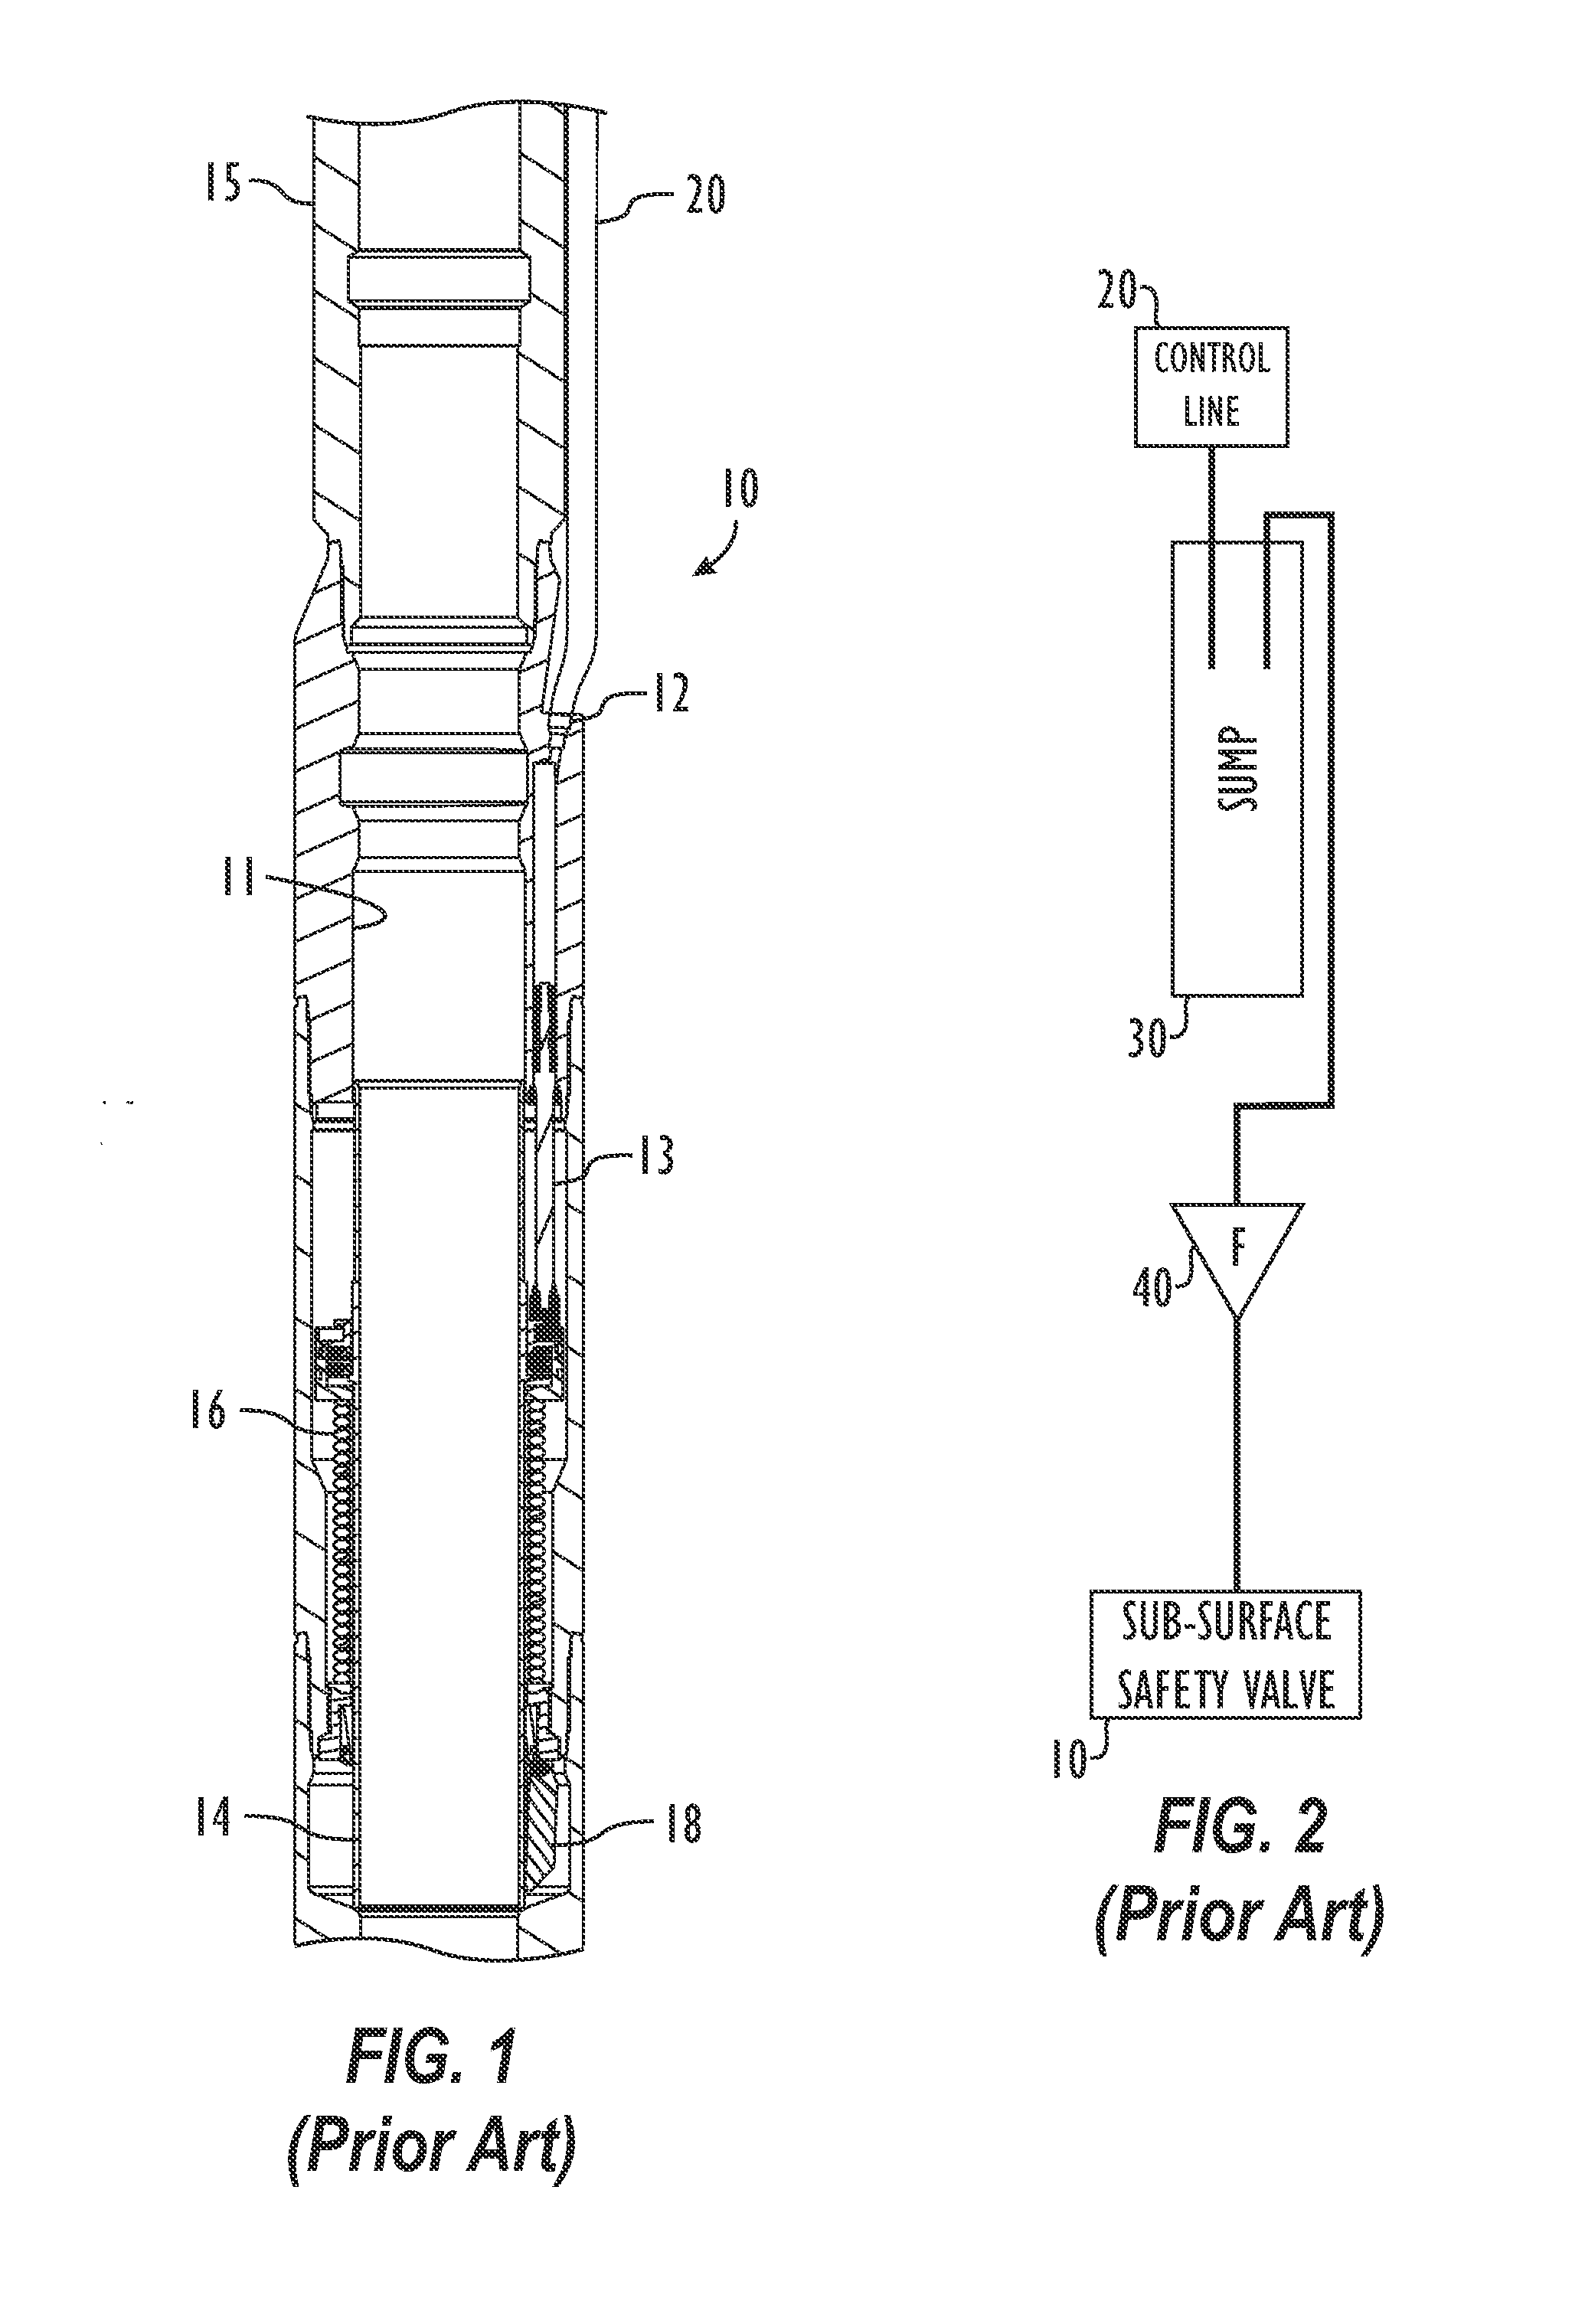 Dual Control Line System and Method for Operating Surface Controlled Sub-Surface Safety Valve in a Well